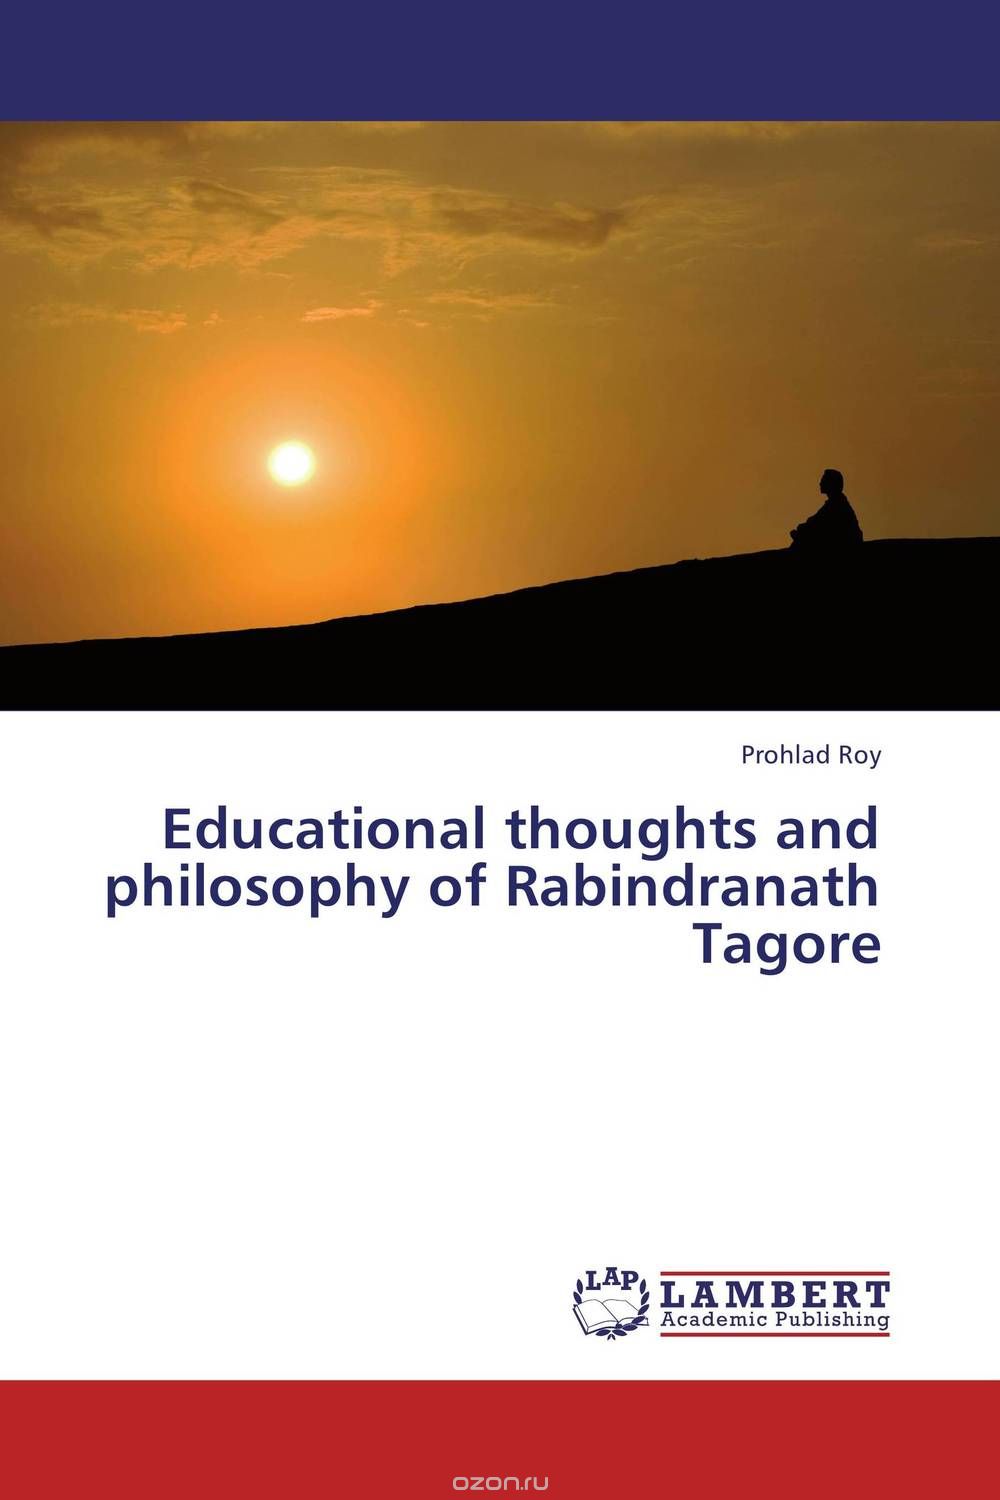 Скачать книгу "Educational thoughts and philosophy of Rabindranath Tagore"